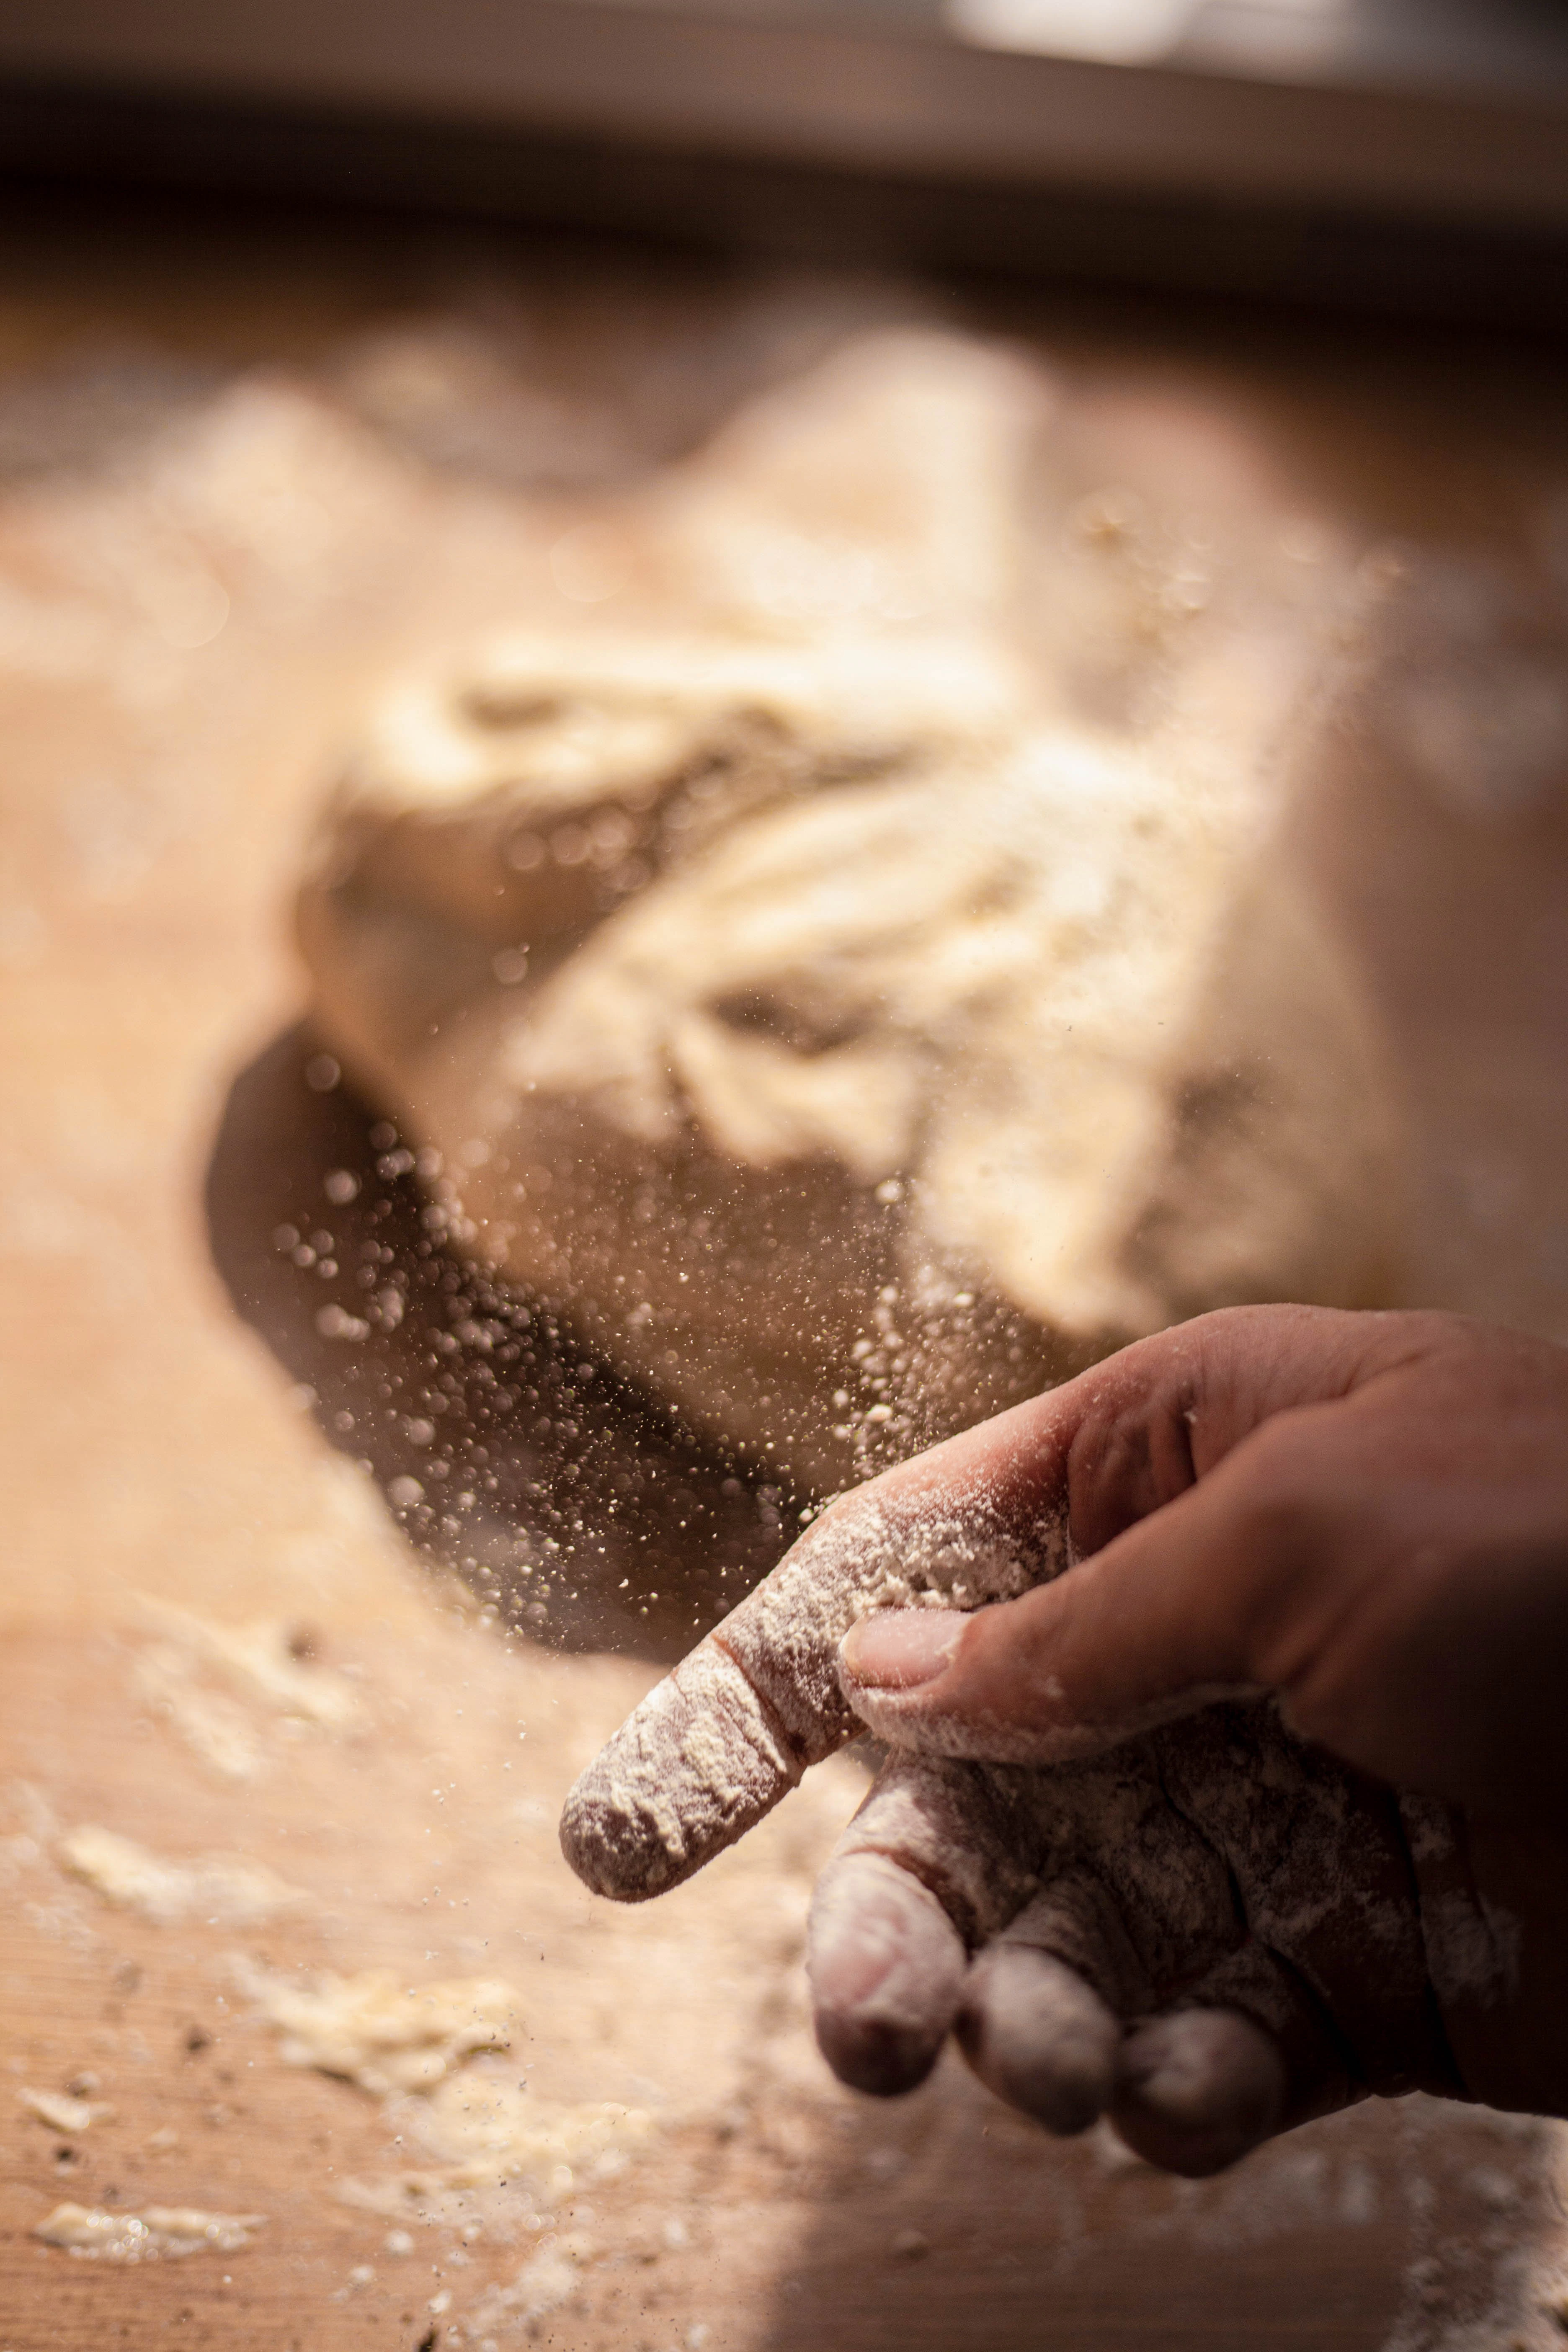 A hand covered in flour is next to a loaf of dough.